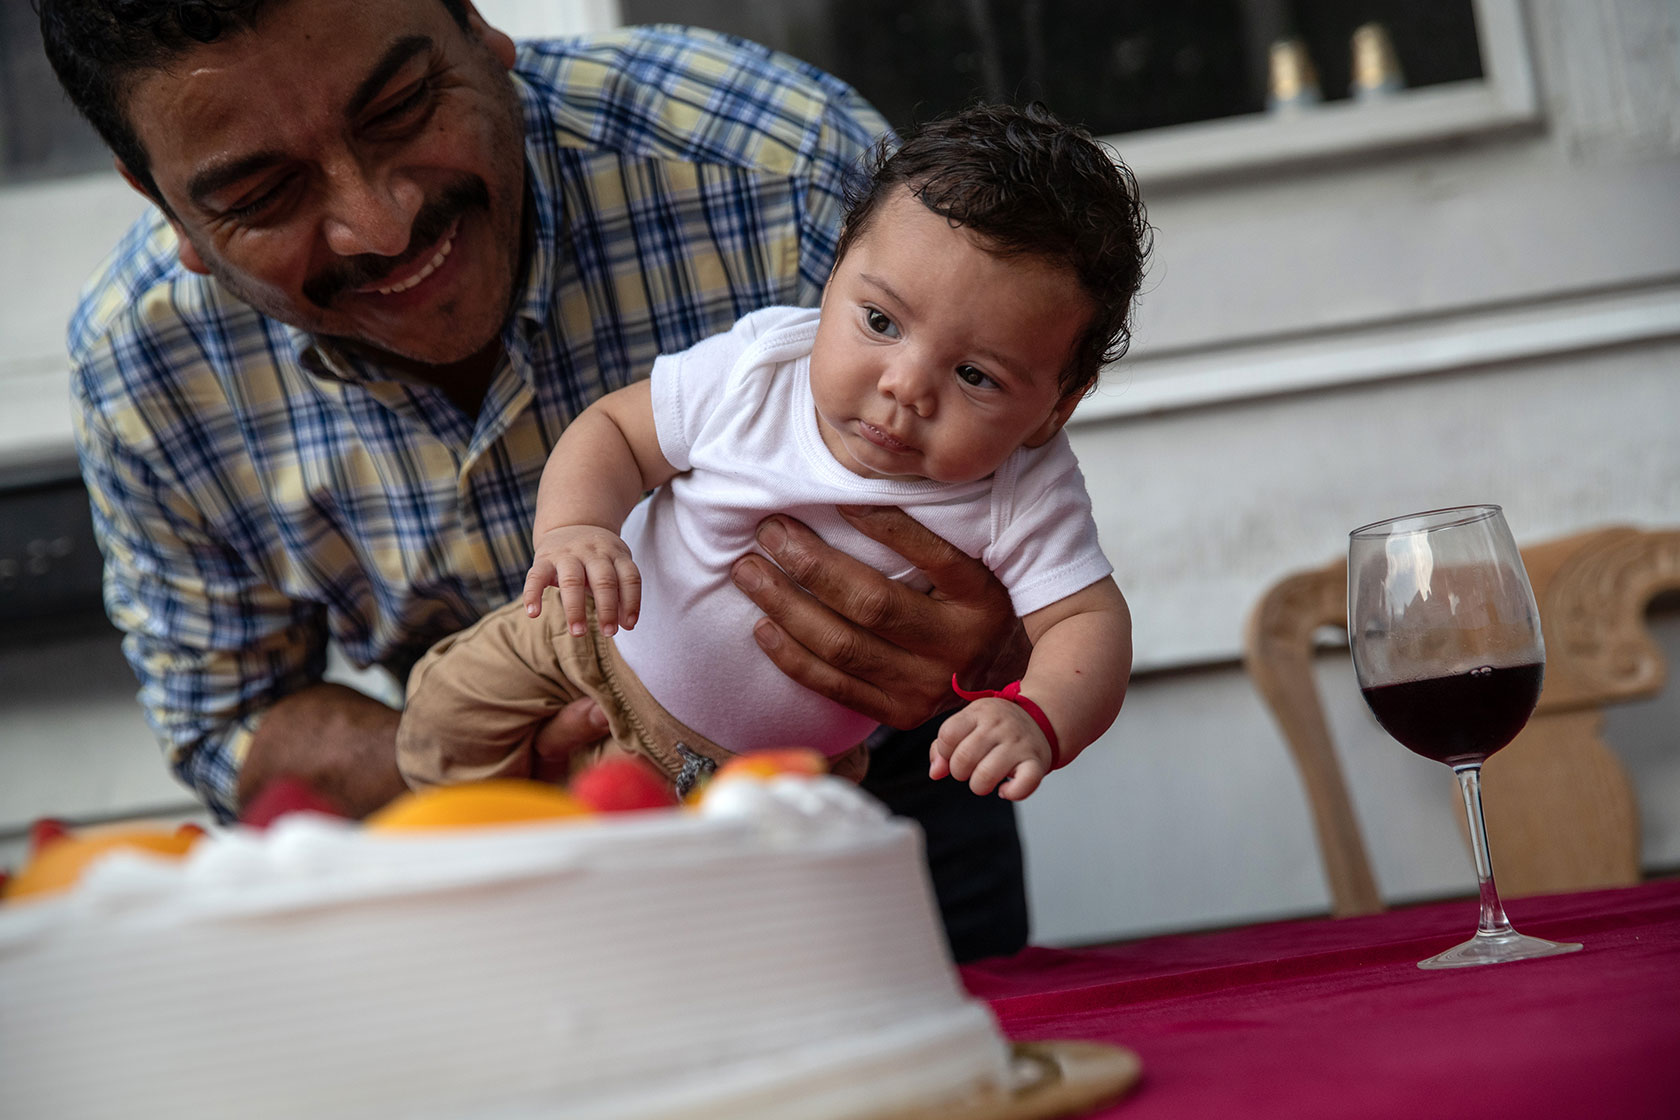 Photo shows a man in a plaid shirt holding a young baby in front of a cake.